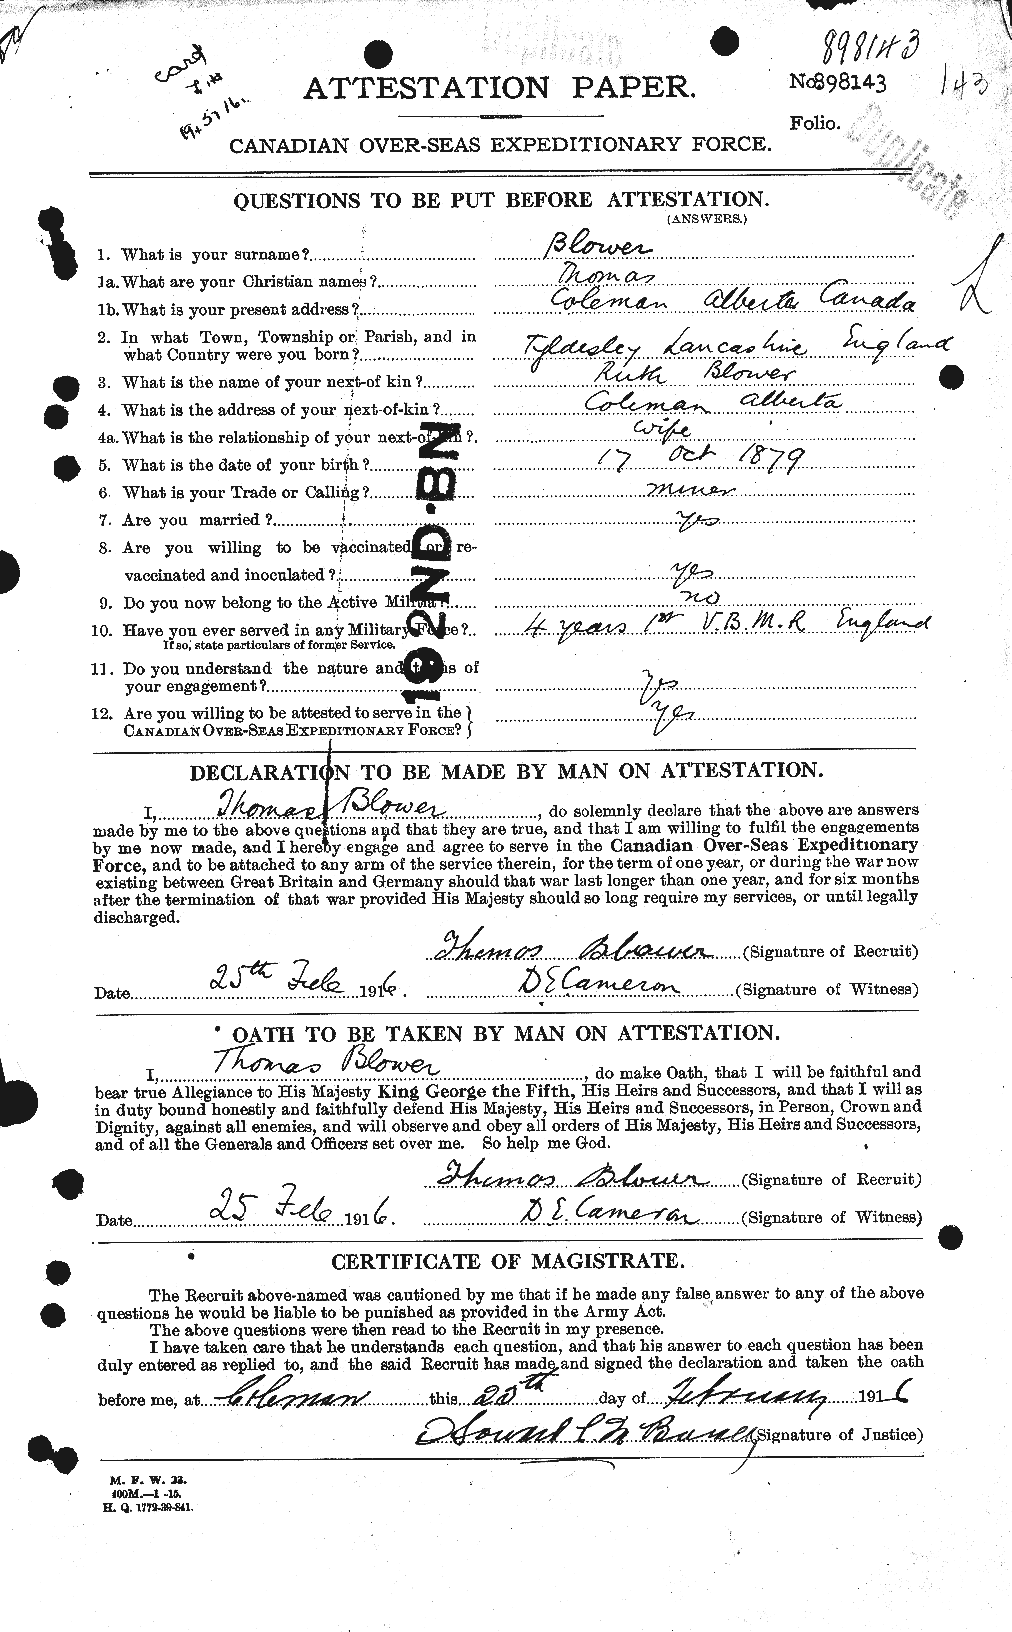 Personnel Records of the First World War - CEF 247444a